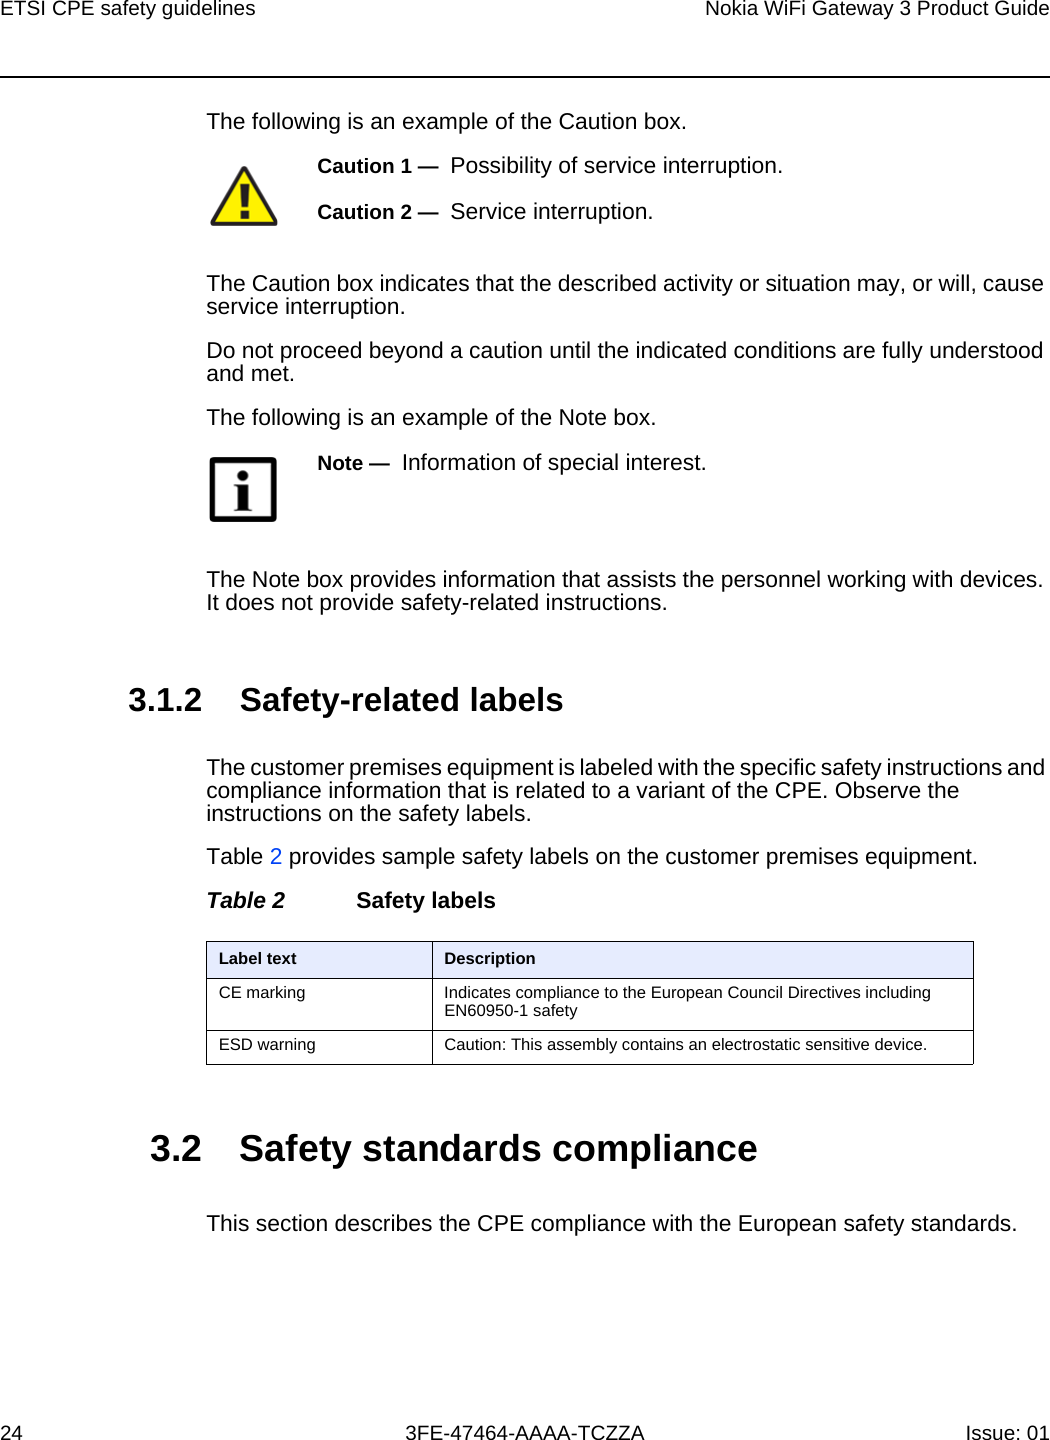 ETSI CPE safety guidelines24Nokia WiFi Gateway 3 Product Guide3FE-47464-AAAA-TCZZA Issue: 01 The following is an example of the Caution box.The Caution box indicates that the described activity or situation may, or will, cause service interruption.Do not proceed beyond a caution until the indicated conditions are fully understood and met.The following is an example of the Note box.The Note box provides information that assists the personnel working with devices. It does not provide safety-related instructions.3.1.2 Safety-related labelsThe customer premises equipment is labeled with the specific safety instructions and compliance information that is related to a variant of the CPE. Observe the instructions on the safety labels.Table 2 provides sample safety labels on the customer premises equipment.Table 2 Safety labels3.2 Safety standards complianceThis section describes the CPE compliance with the European safety standards.Caution 1 —  Possibility of service interruption.Caution 2 —  Service interruption.Note —  Information of special interest.Label text DescriptionCE marking Indicates compliance to the European Council Directives including EN60950-1 safetyESD warning Caution: This assembly contains an electrostatic sensitive device.